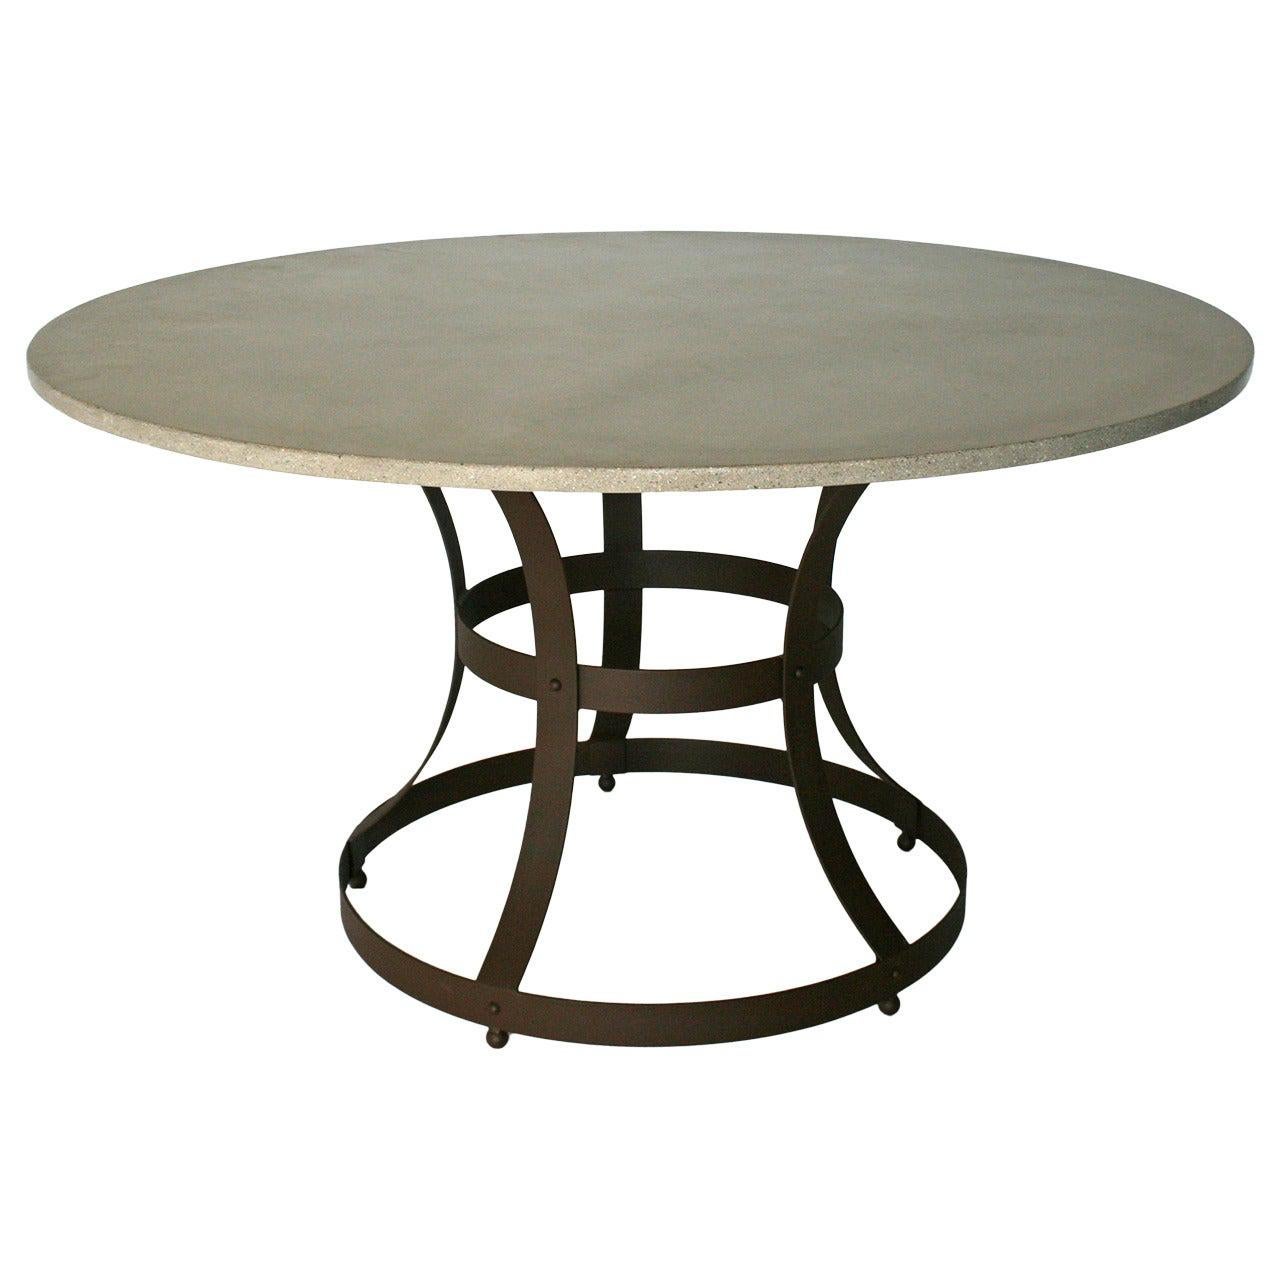 James de Wulf Concrete Hourglass Dining Table, 82" For Sale